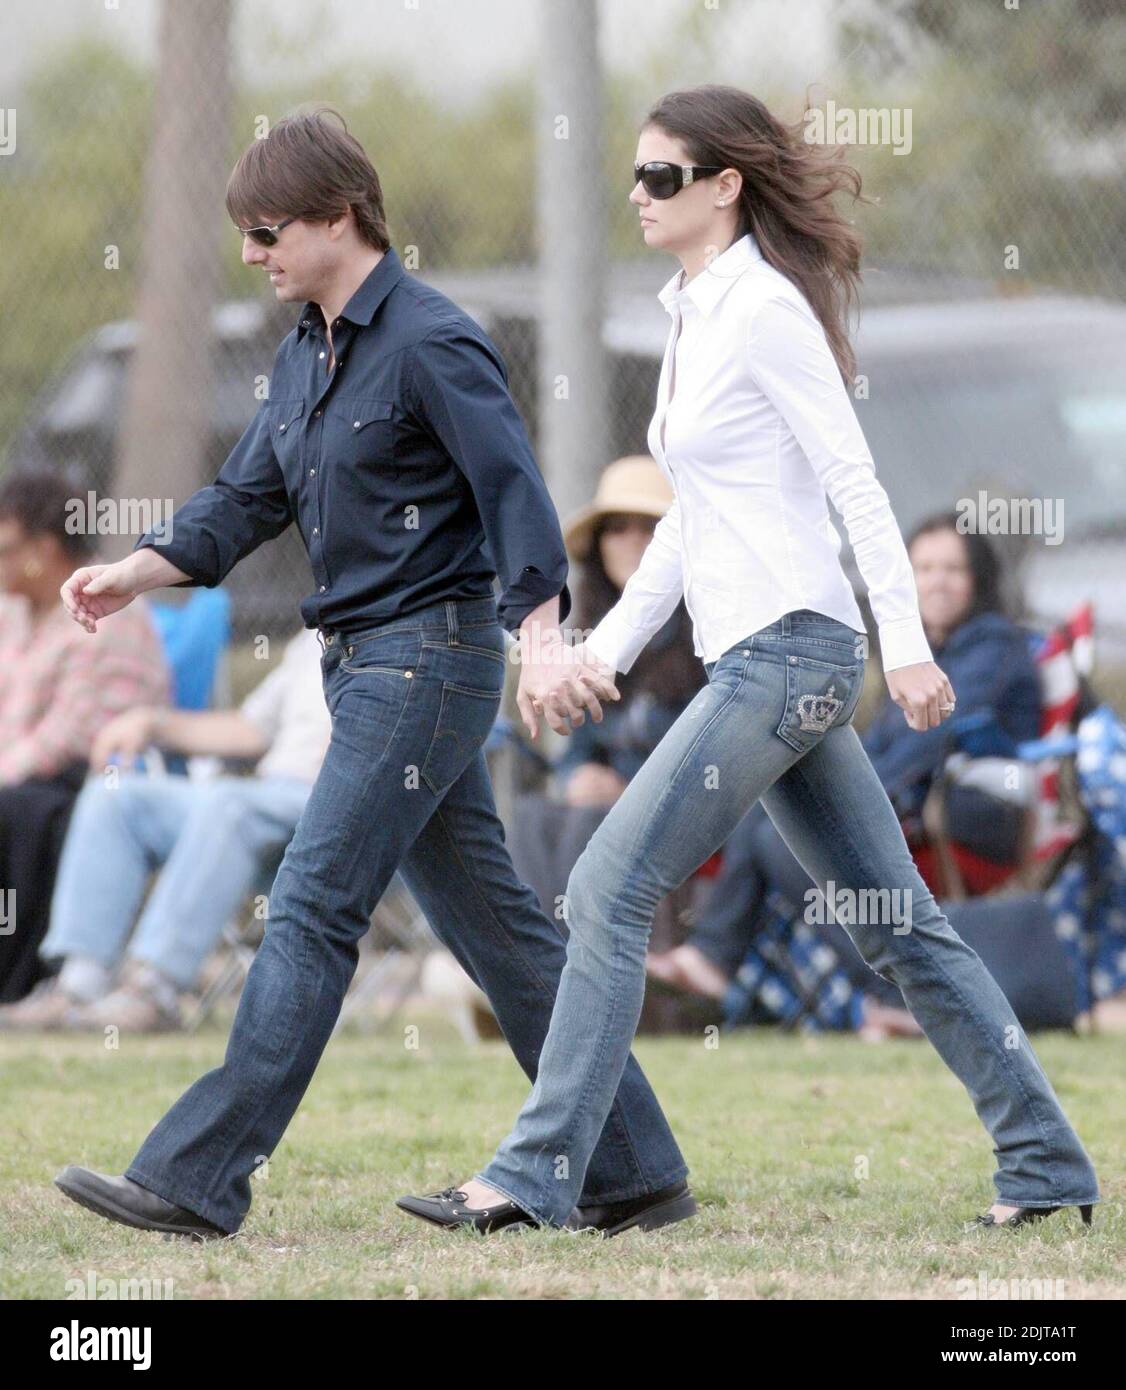 Tom Cruise and Katie Holmes make an appearance at Isabella's soccer match  in Beverly Hills, Ca. one week before their wedding in Italy. The couple  were very tactile and kept hugging and